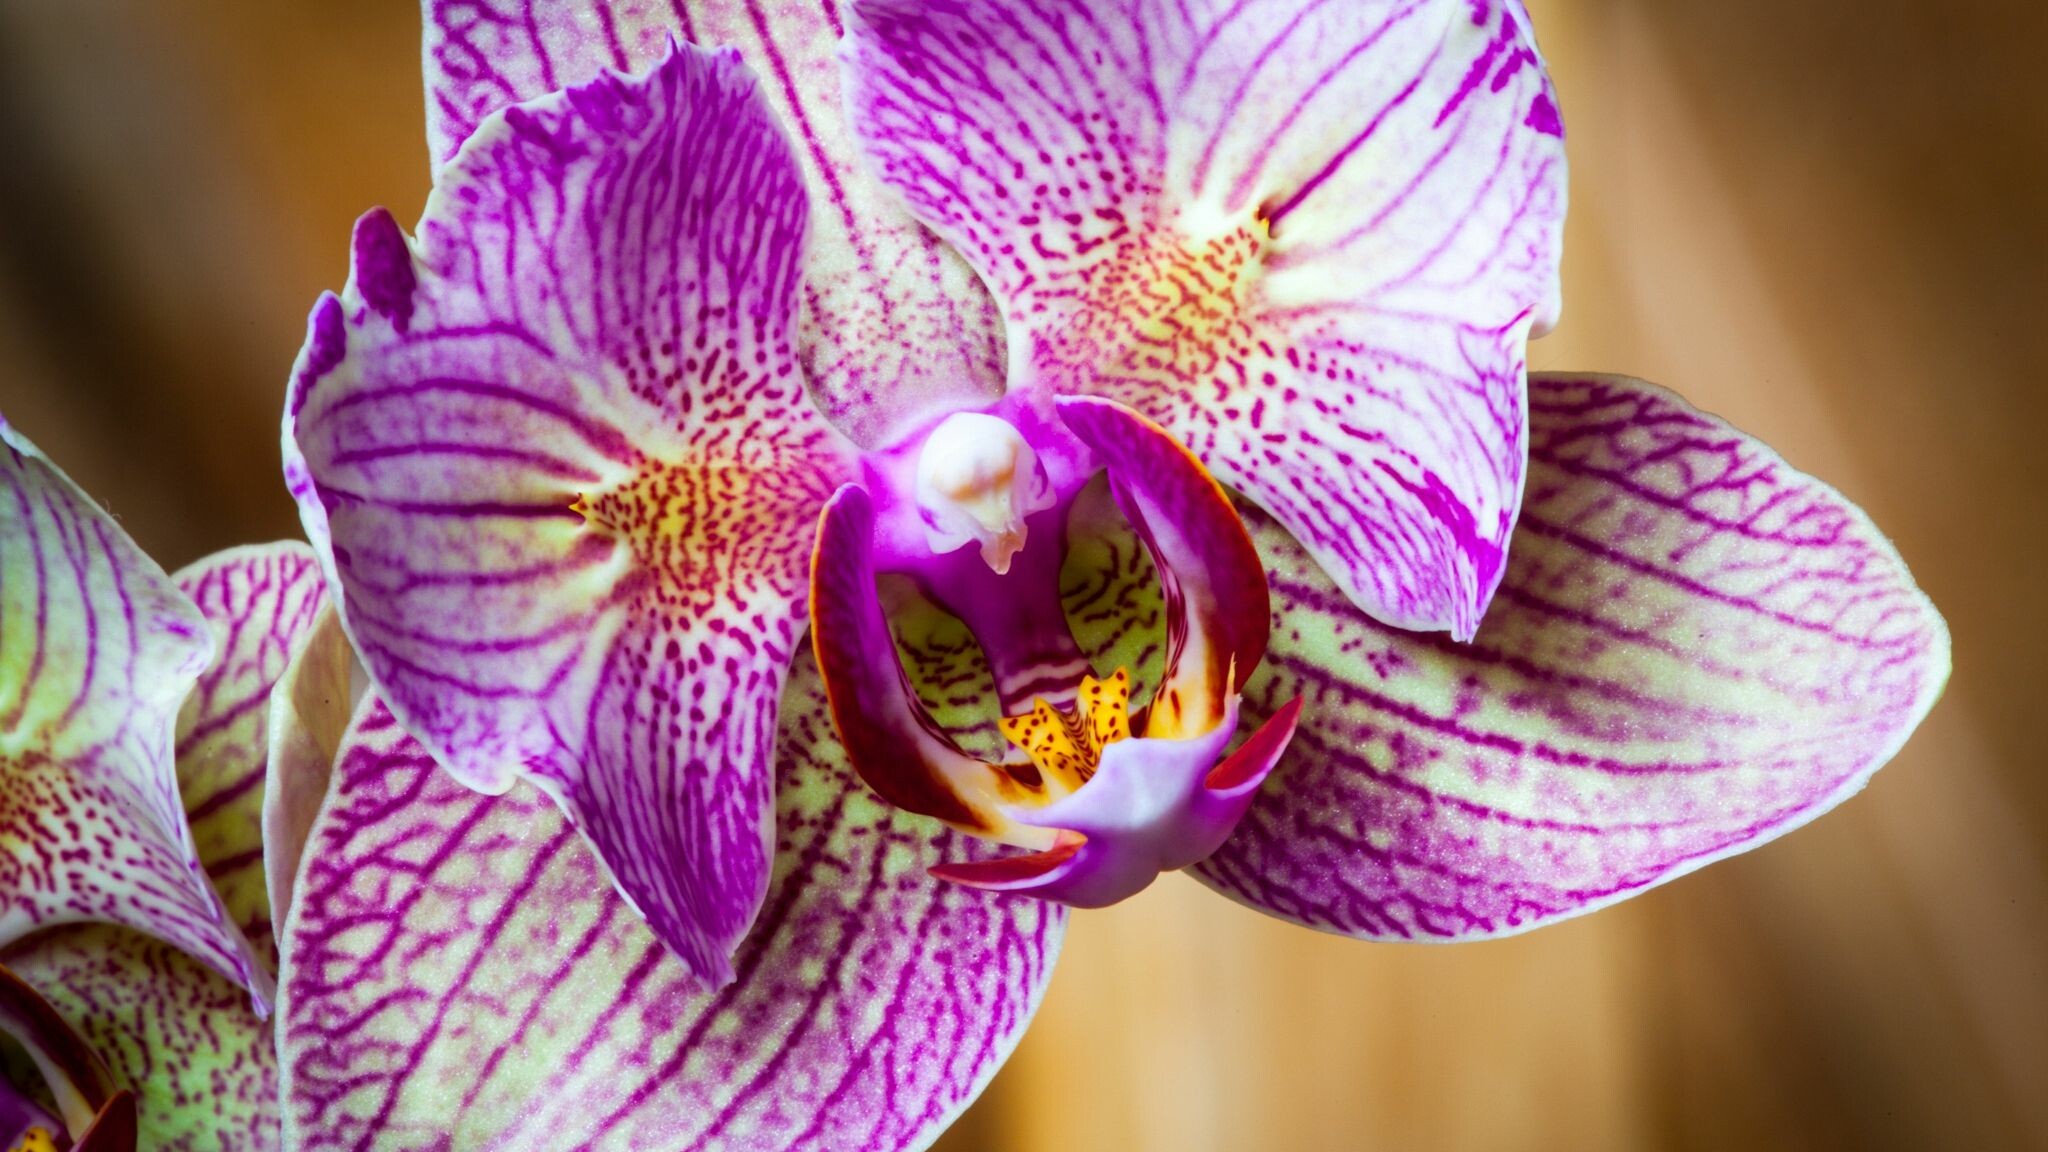 Orchid: A characteristic, highly evolved lip, a petal that protrudes in a blossom of three petals and three sepals, some fused together. 2050x1160 HD Wallpaper.